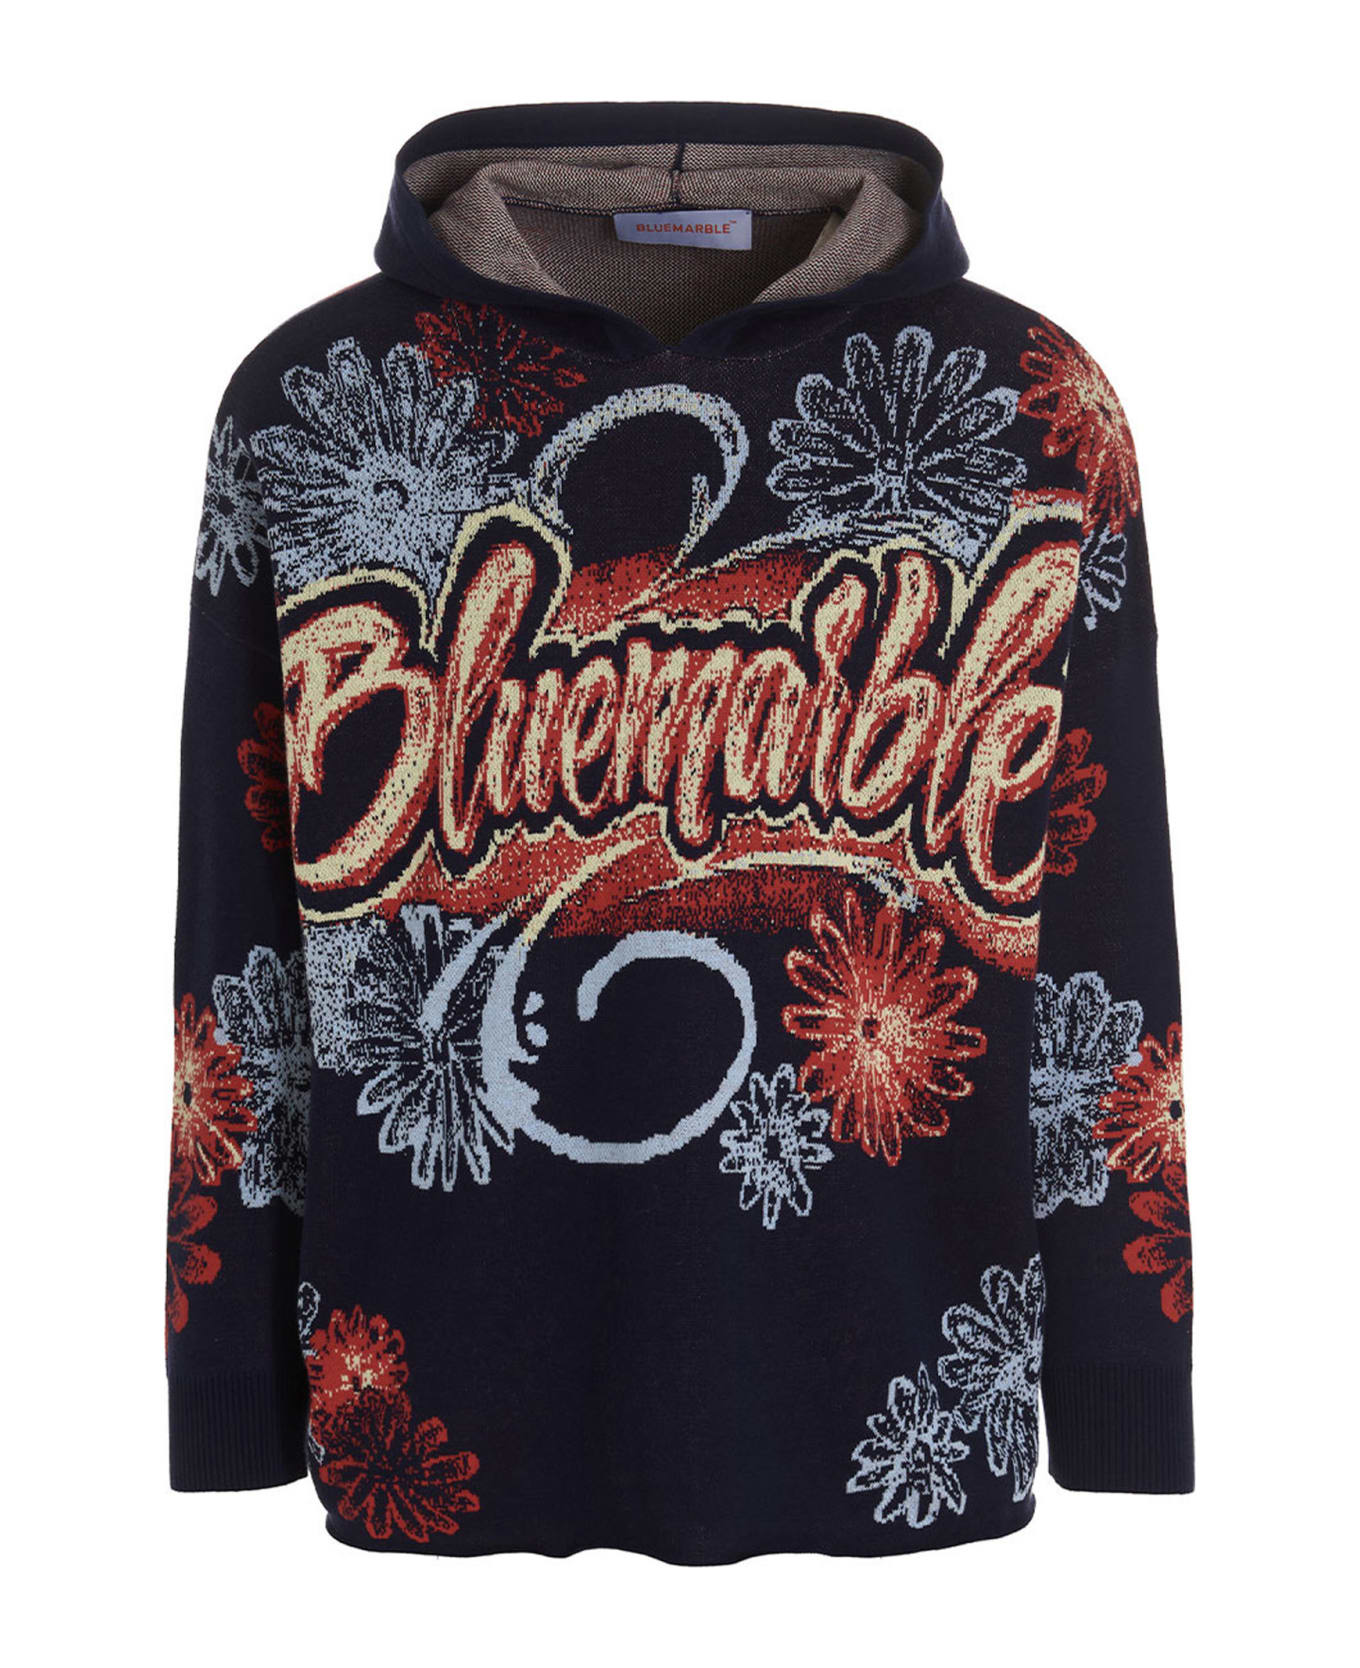 Bluemarble 'knitted Jacquard' Hoodie - Multicolor